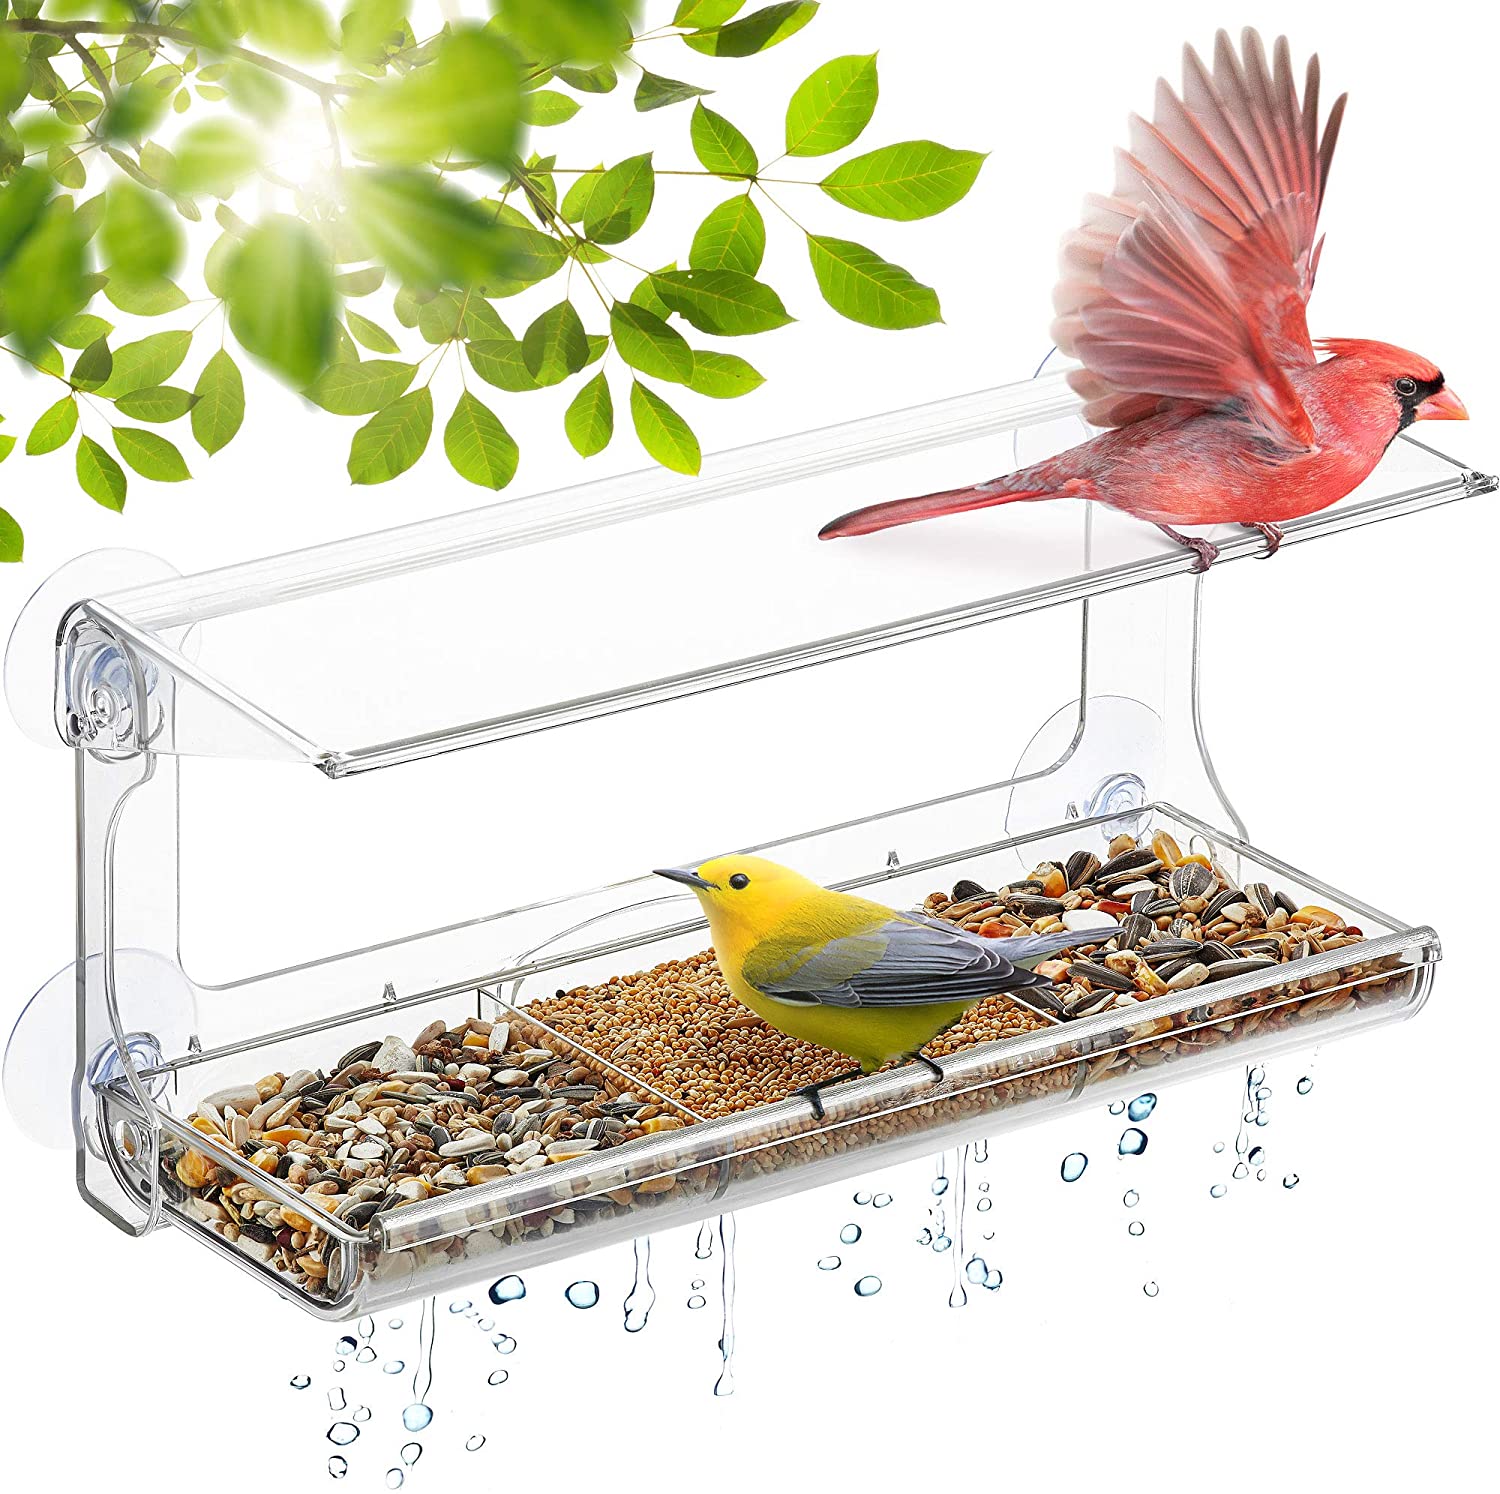 DF OMER Weatherproof Polycarbonat Window Bird Feeder with Strong Suction Cups, Drainage Holes, and 3-Sectioned Removable Tray 11.6x4.3x5.7 in. Bird Watching Gifts for Up-Close, Indoor Bird Watching